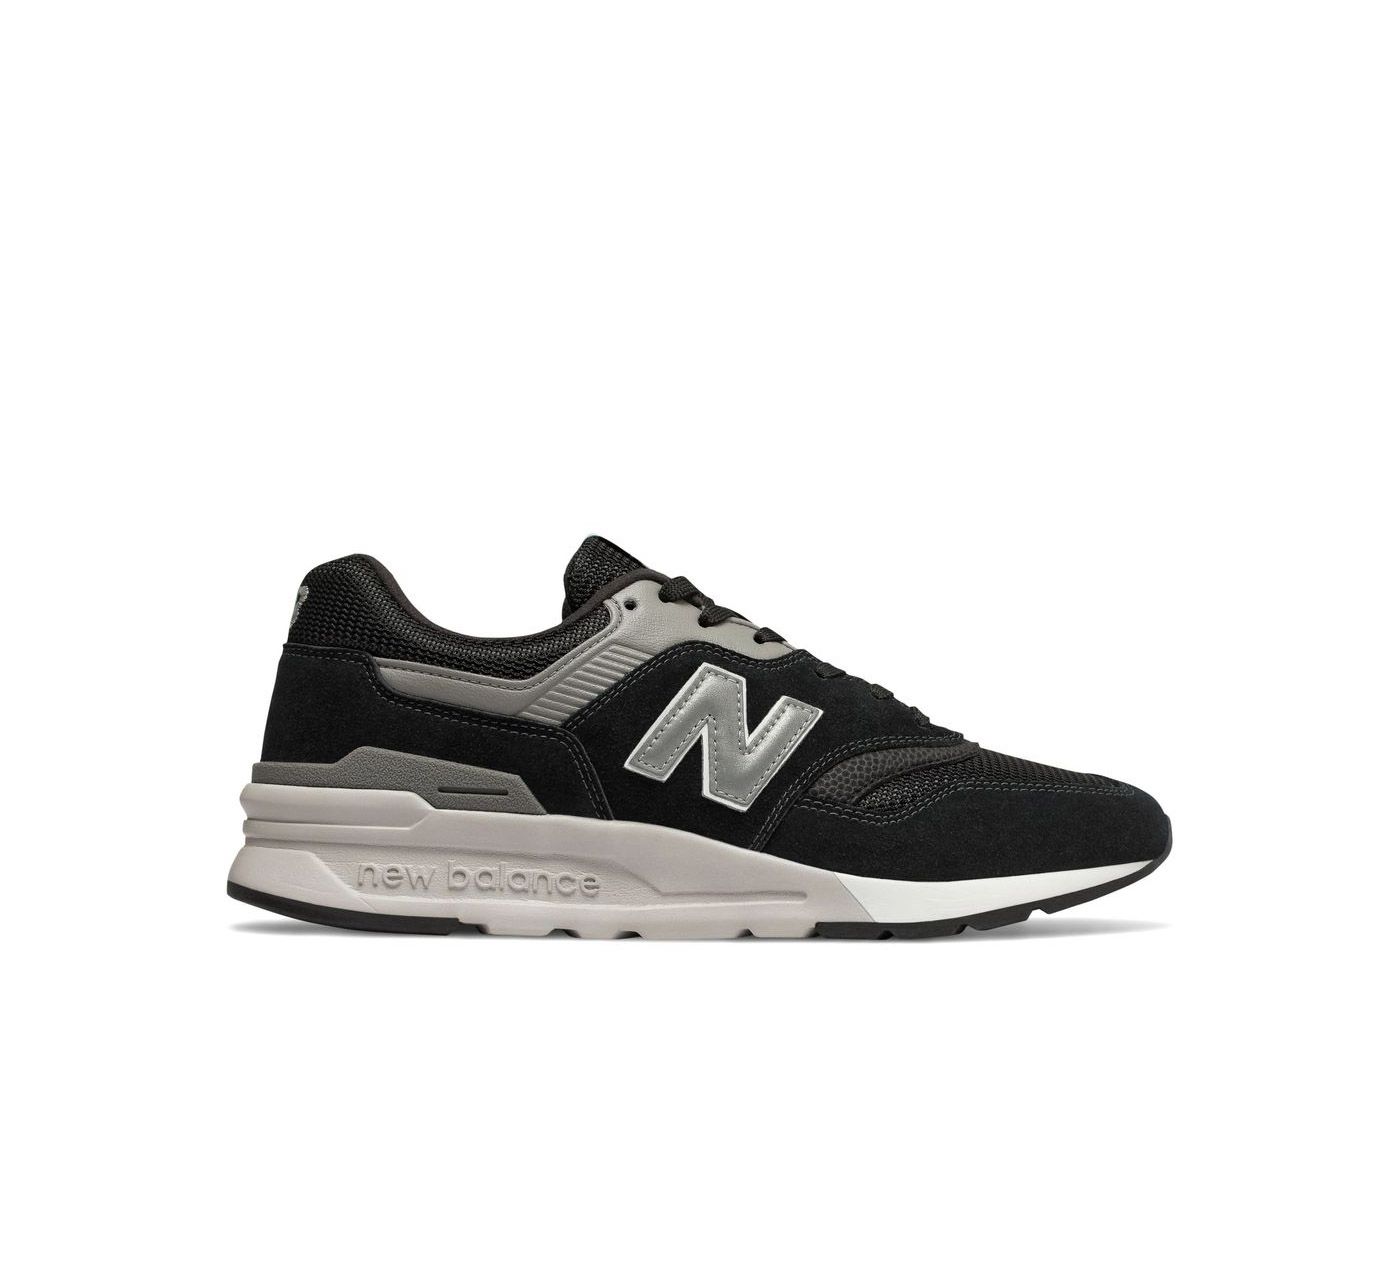 New Balance 997h trainers in black